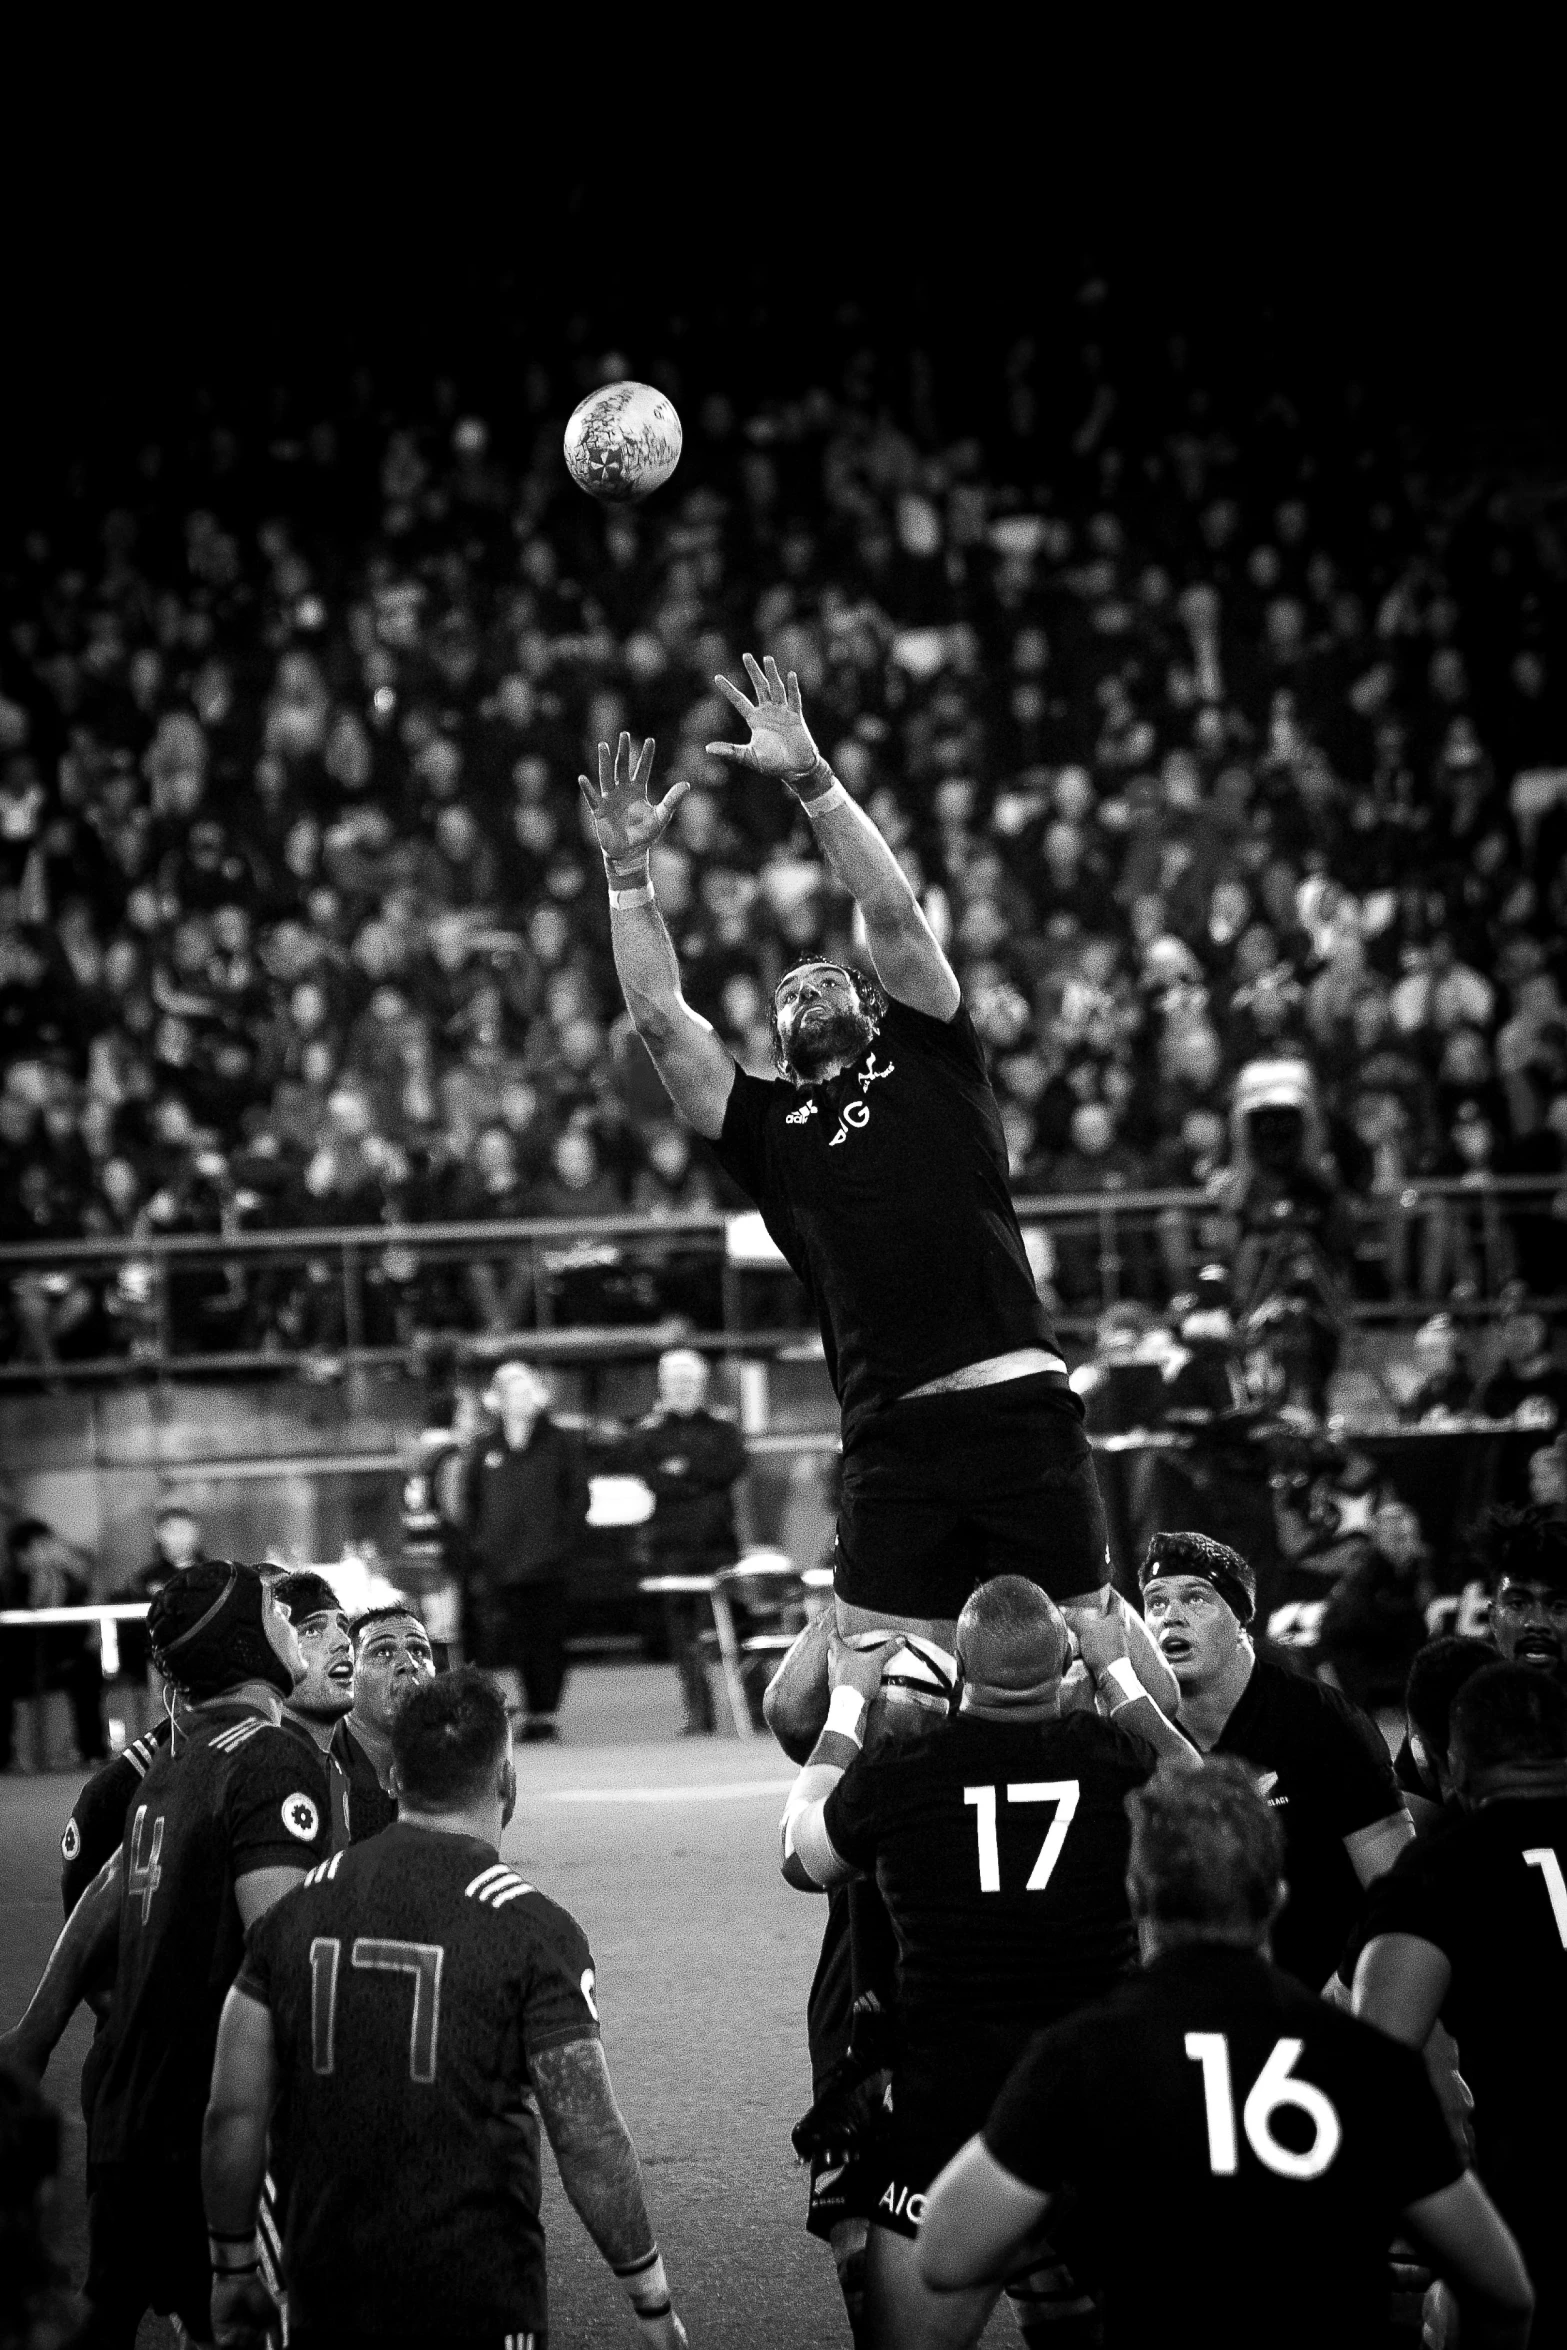 a man jumping in the air to catch a ball